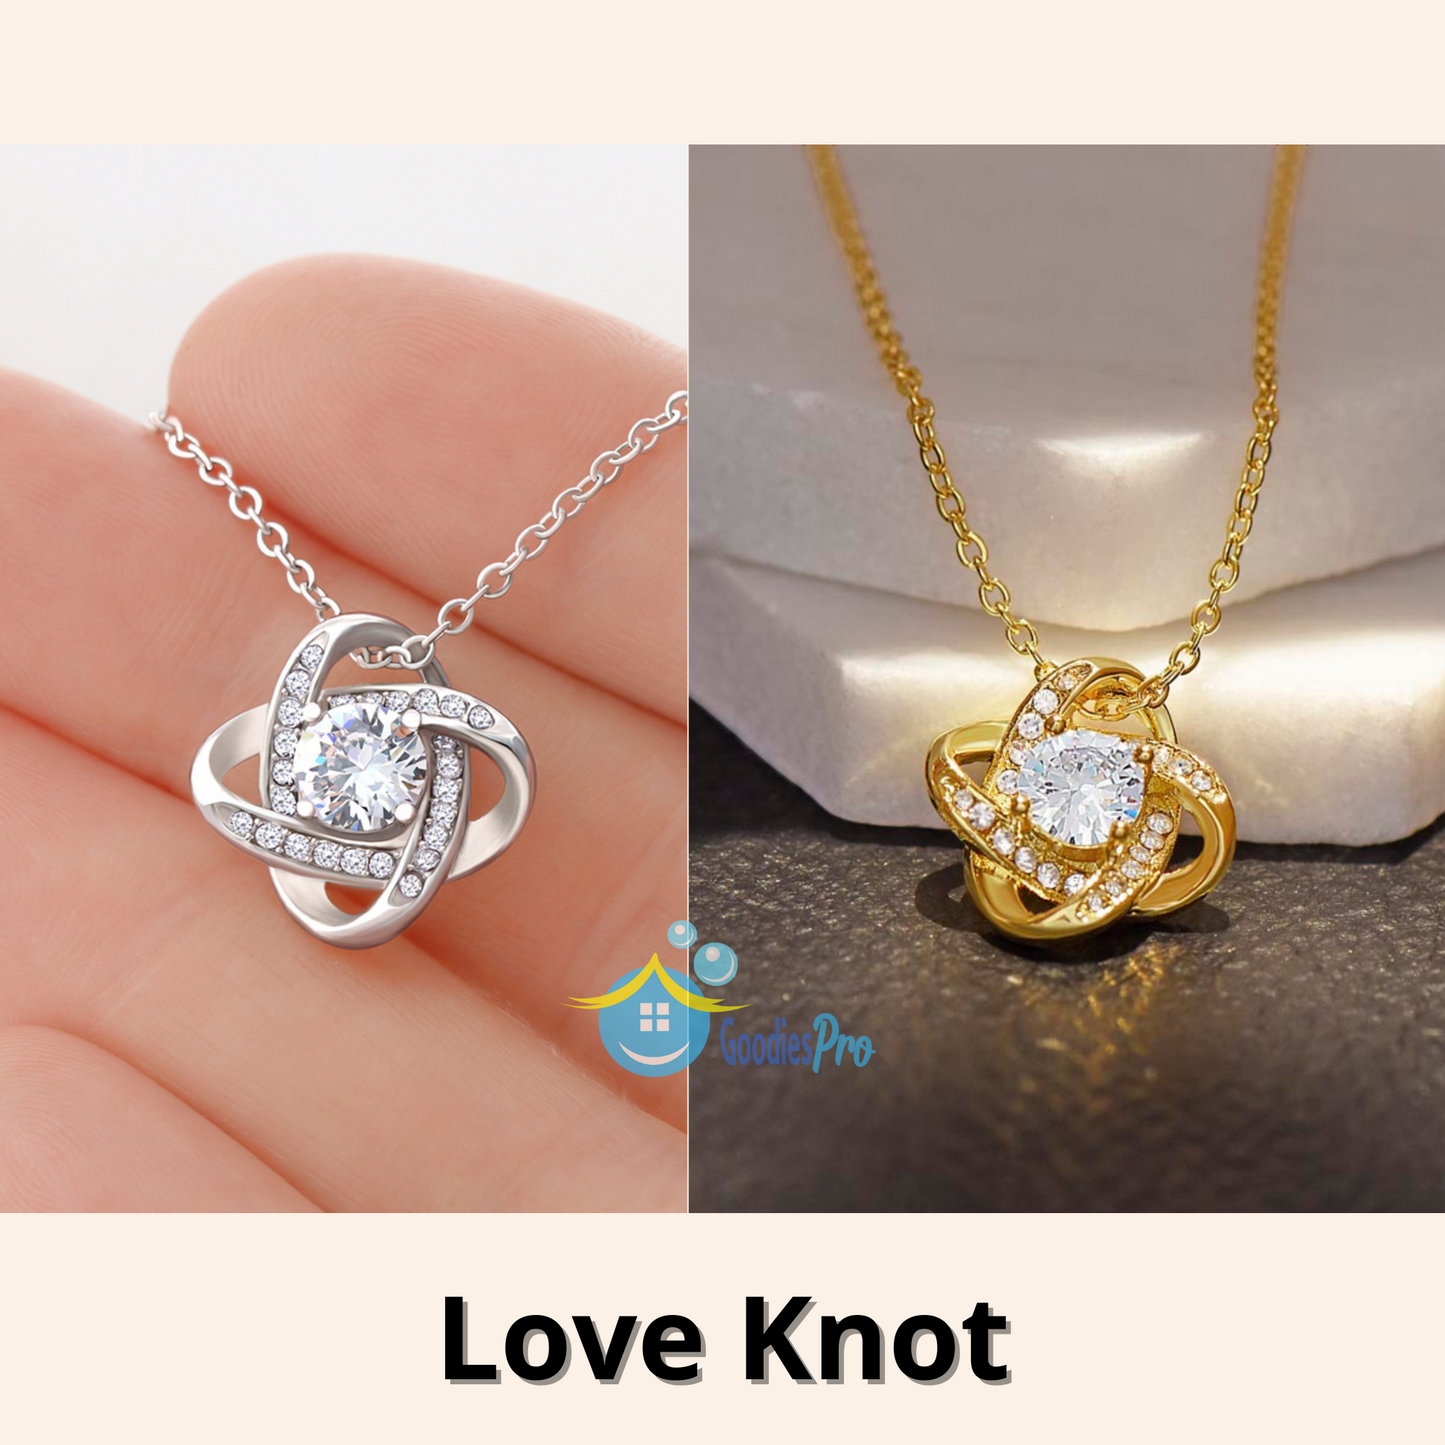 To My Daughter Love Knot Necklace Gift From Dad- Always heart to heart #e217